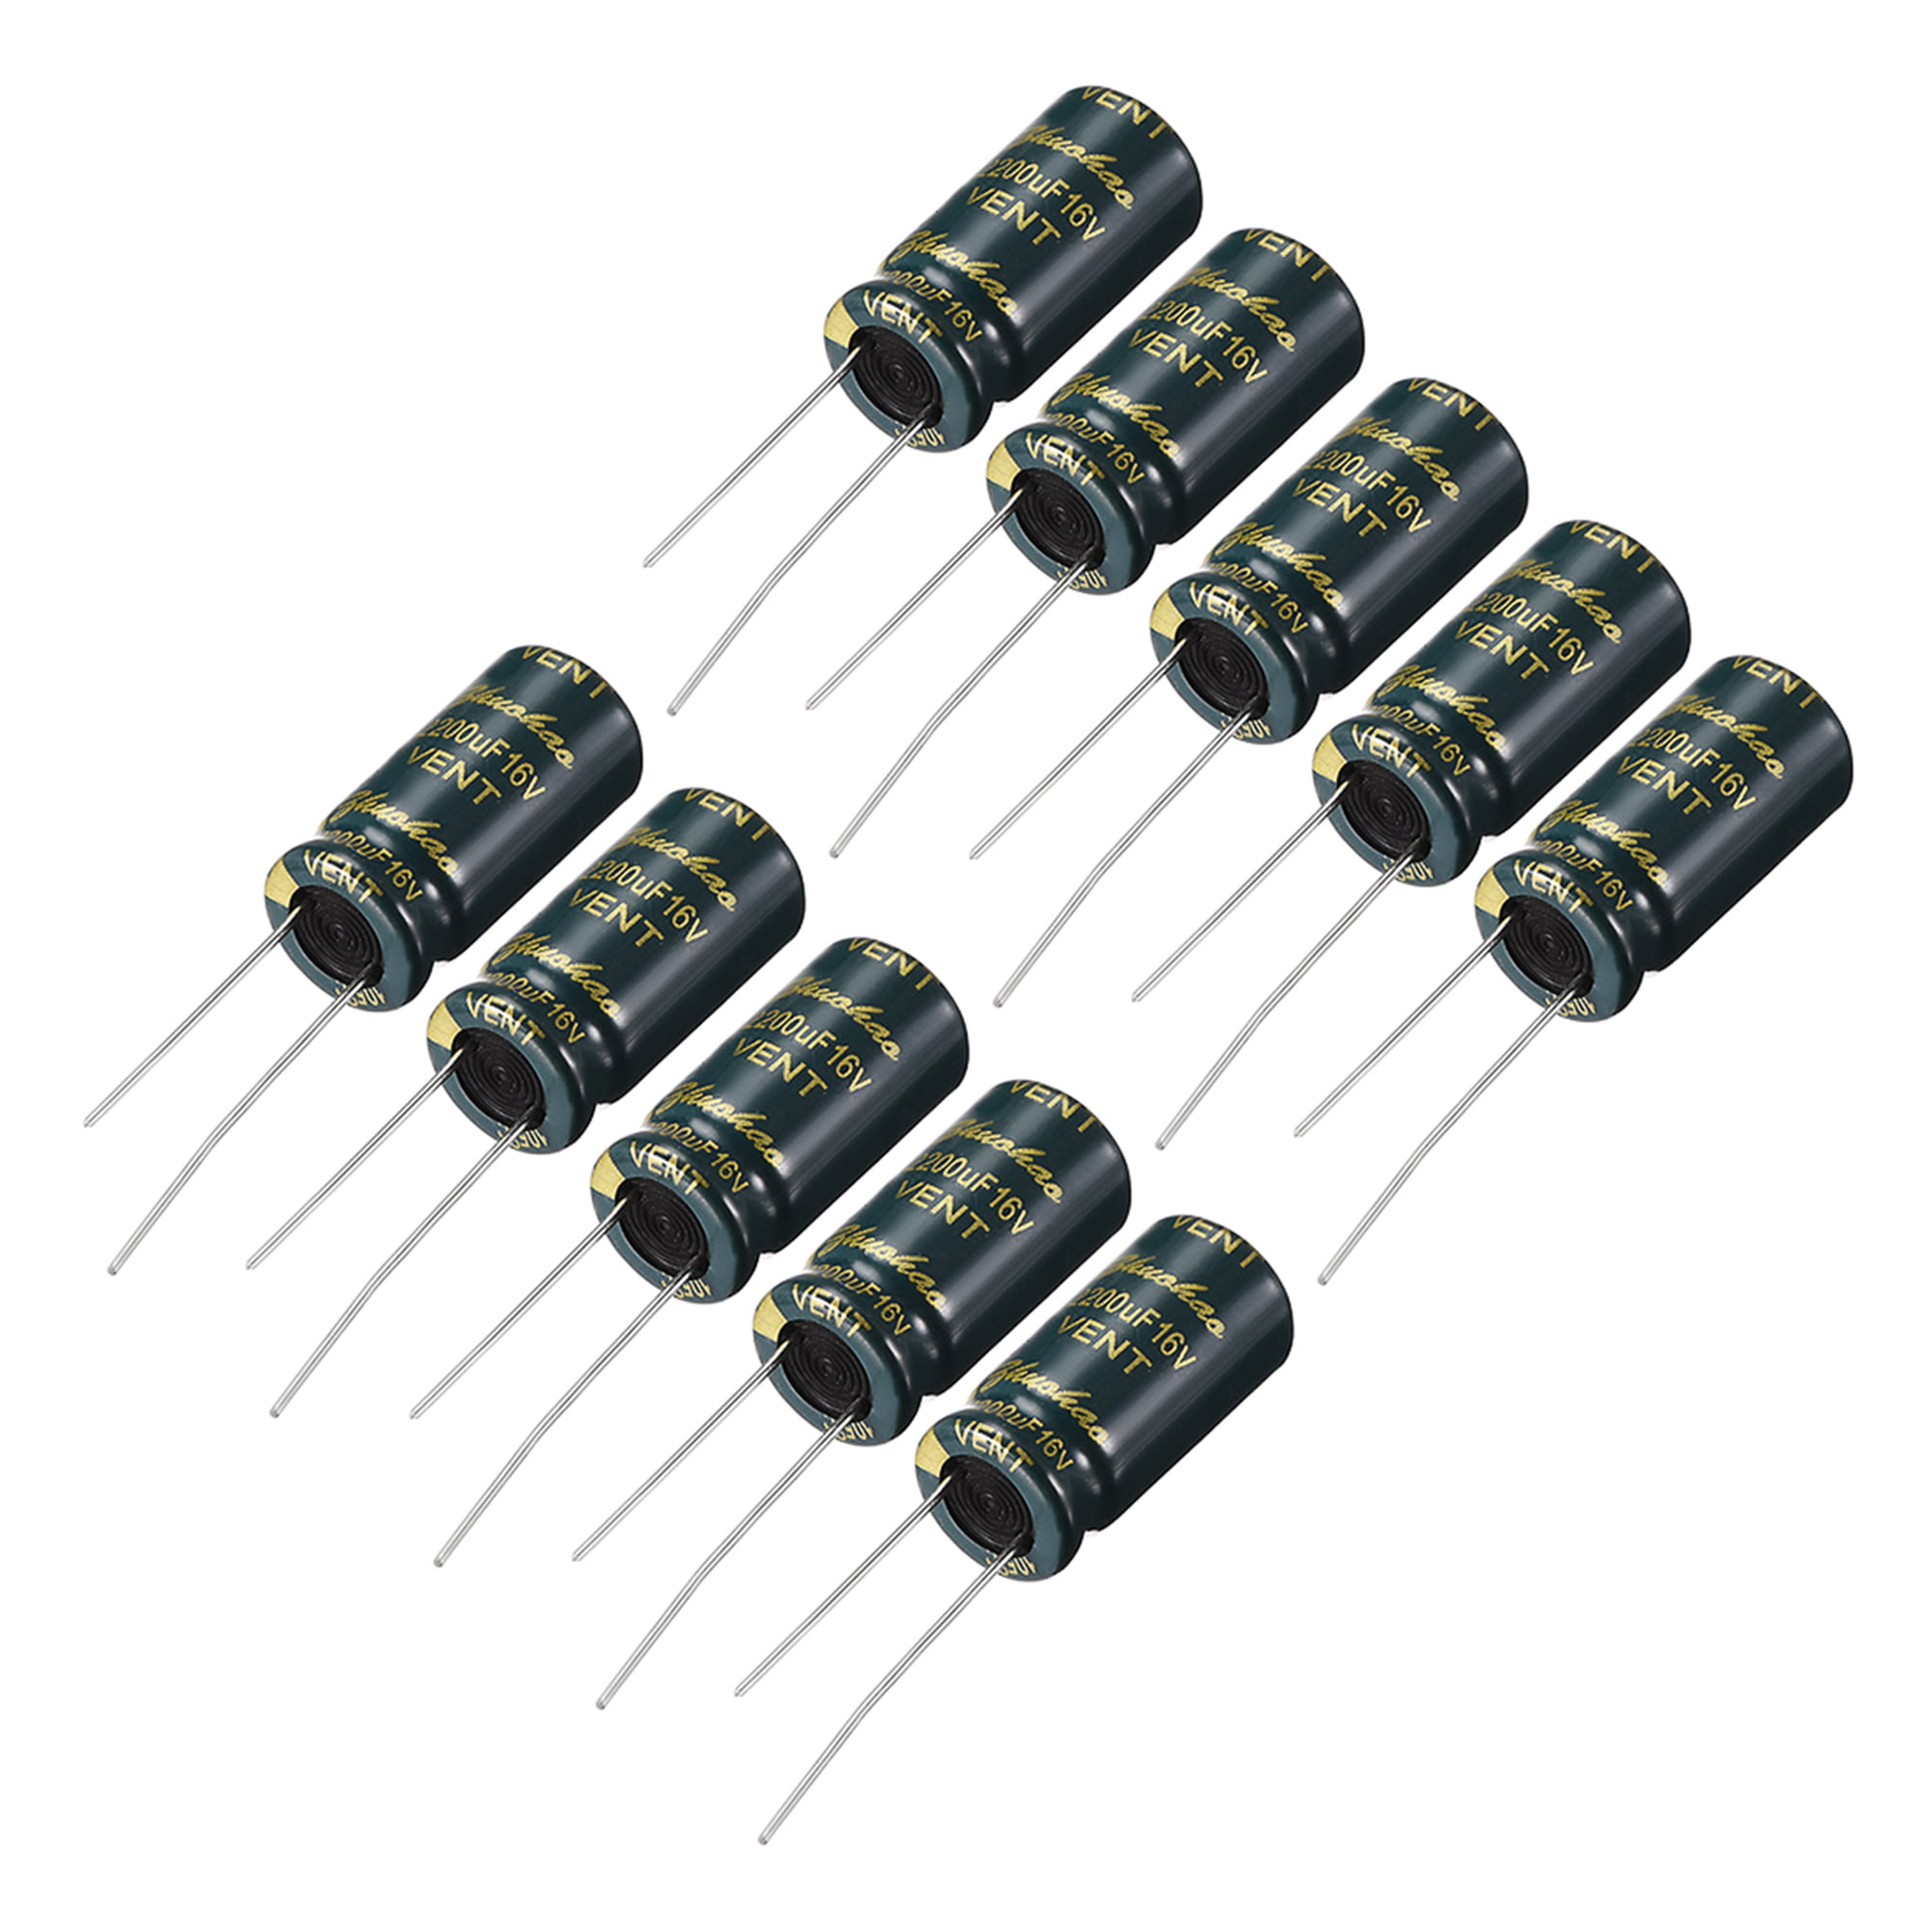 uxcell® Aluminum Radial Electrolytic Capacitor with 1000uF 25V 105 Celsius Life 2000H 10 x 20 mm Black 25pcs 